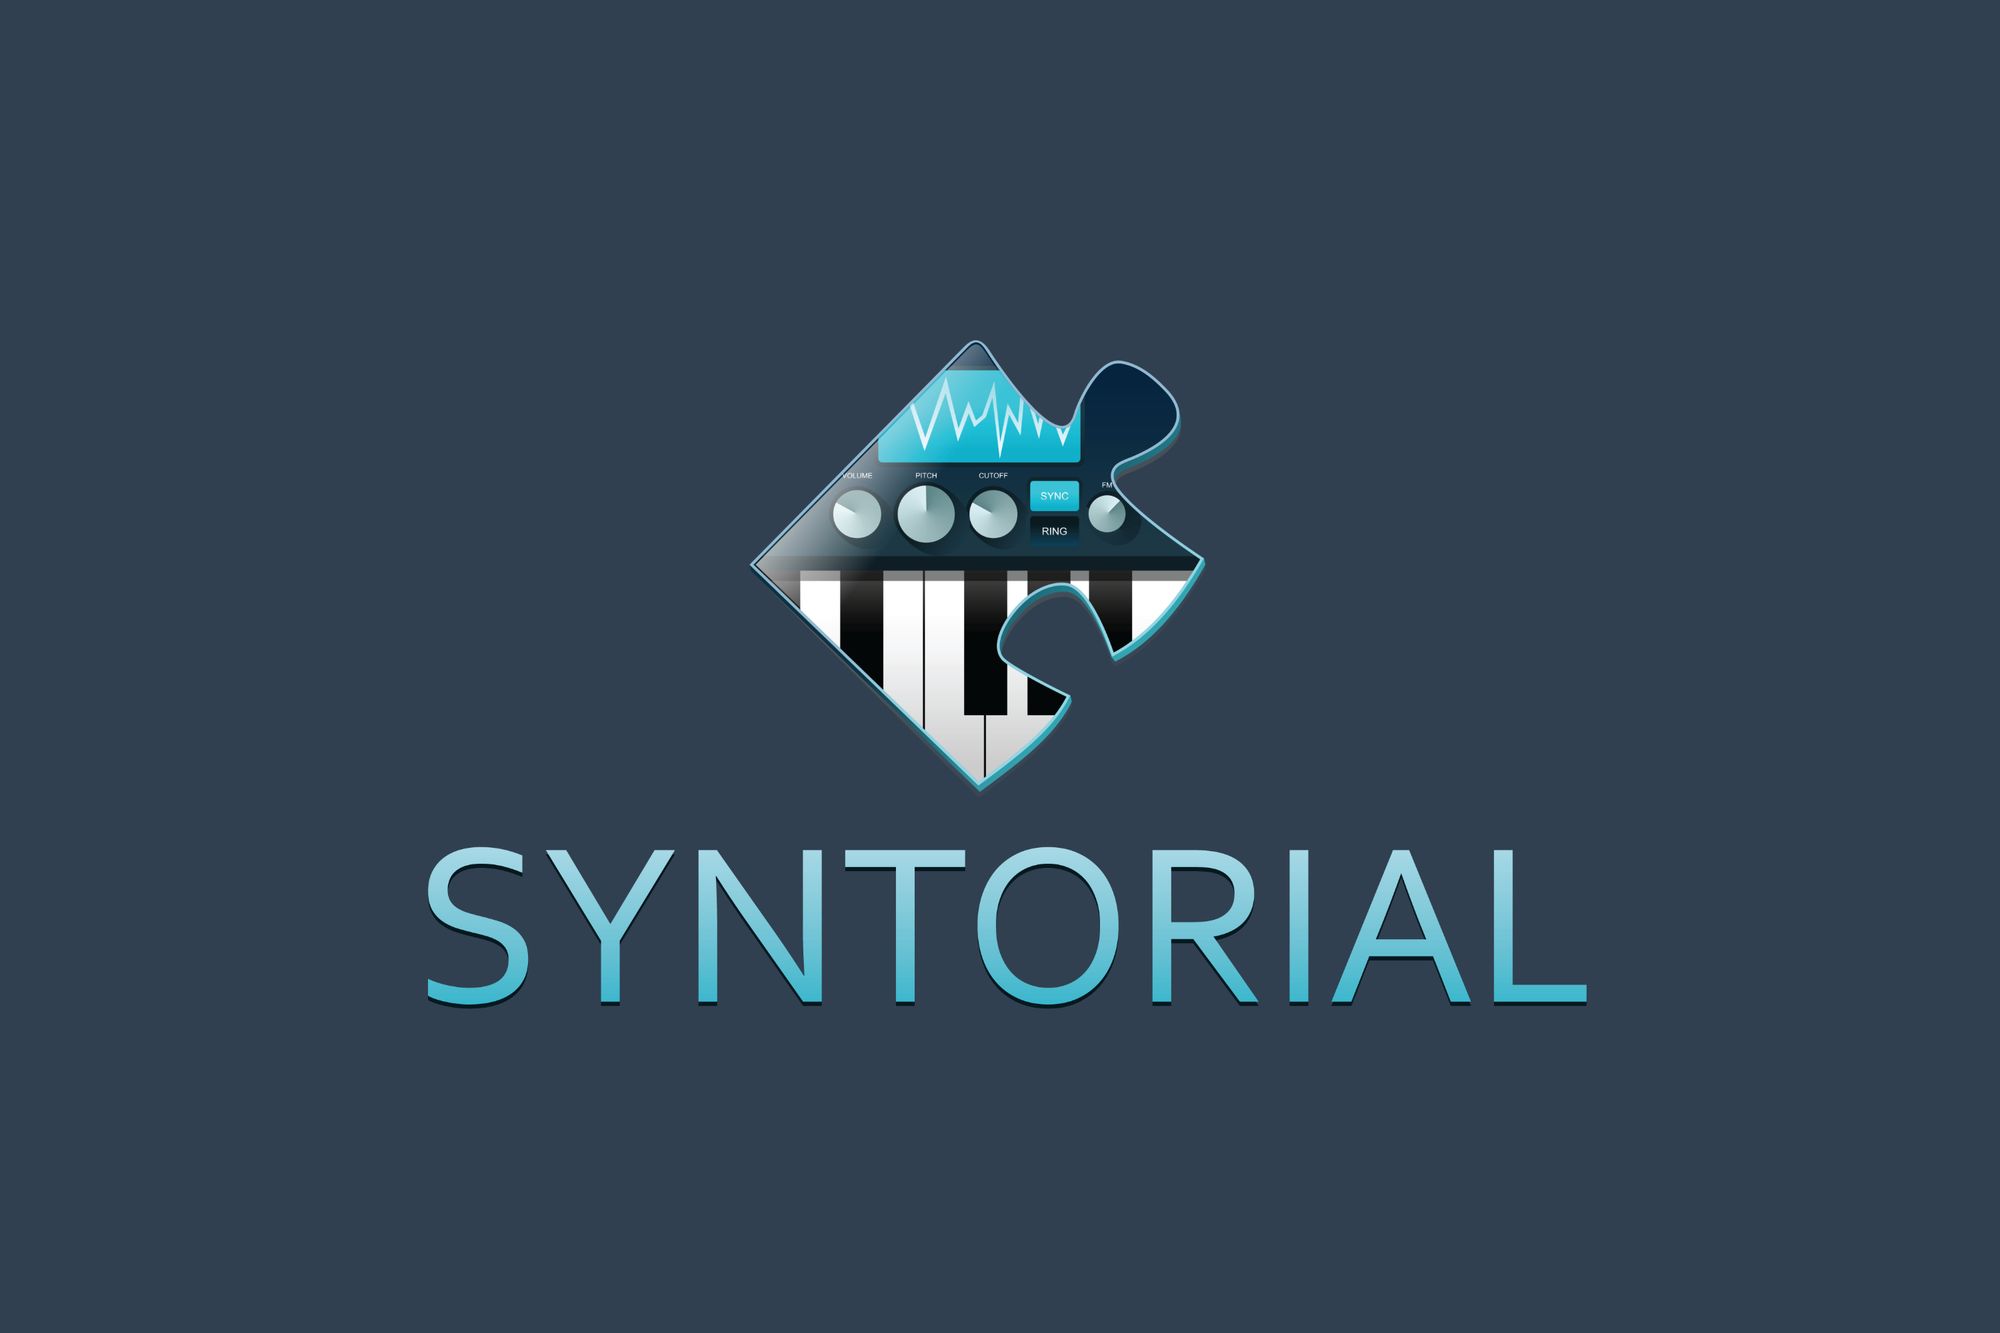 The Syntorial logo and wordmark.